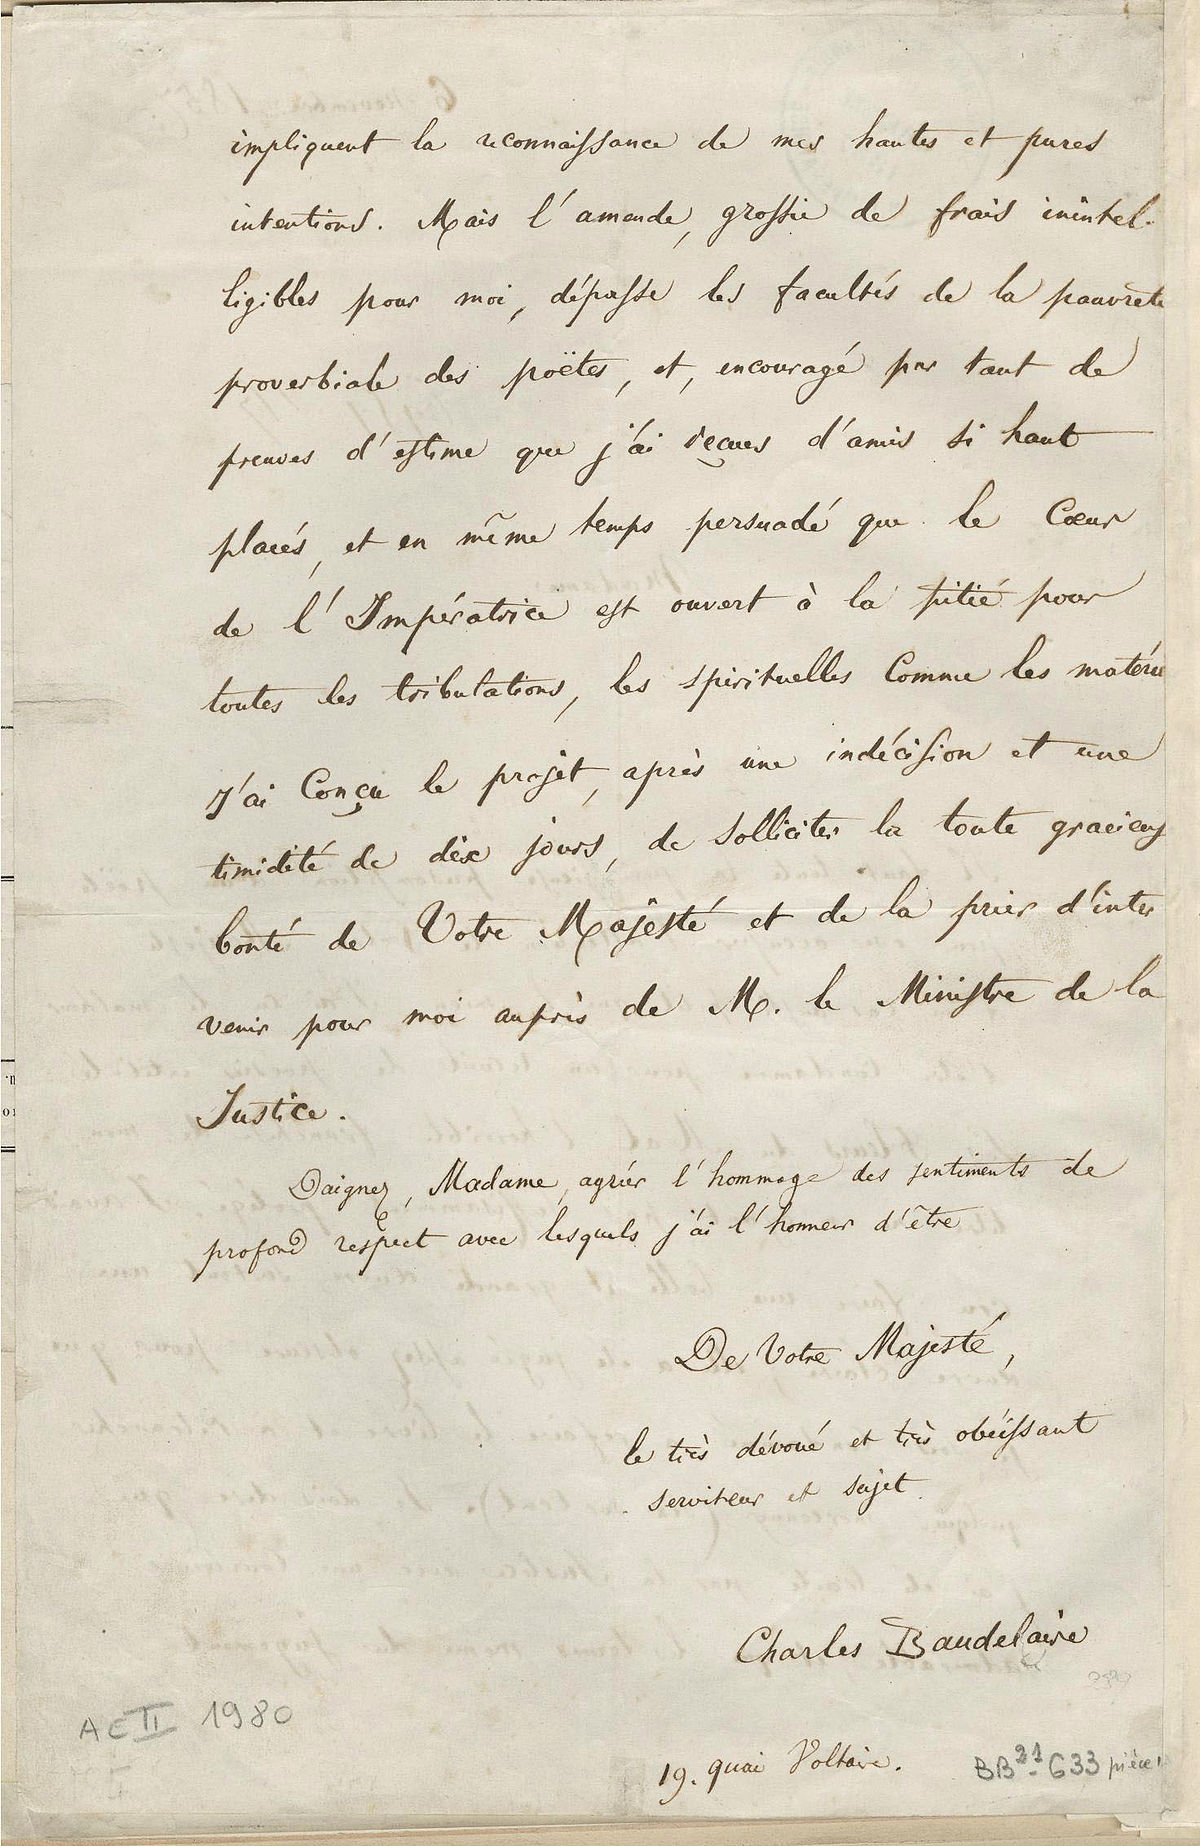 File Lettre De Charles Baudelaire A L Imperatrice Eugenie 2 Archives Nationales Ae Ii 1980 Jpg Wikimedia Commons